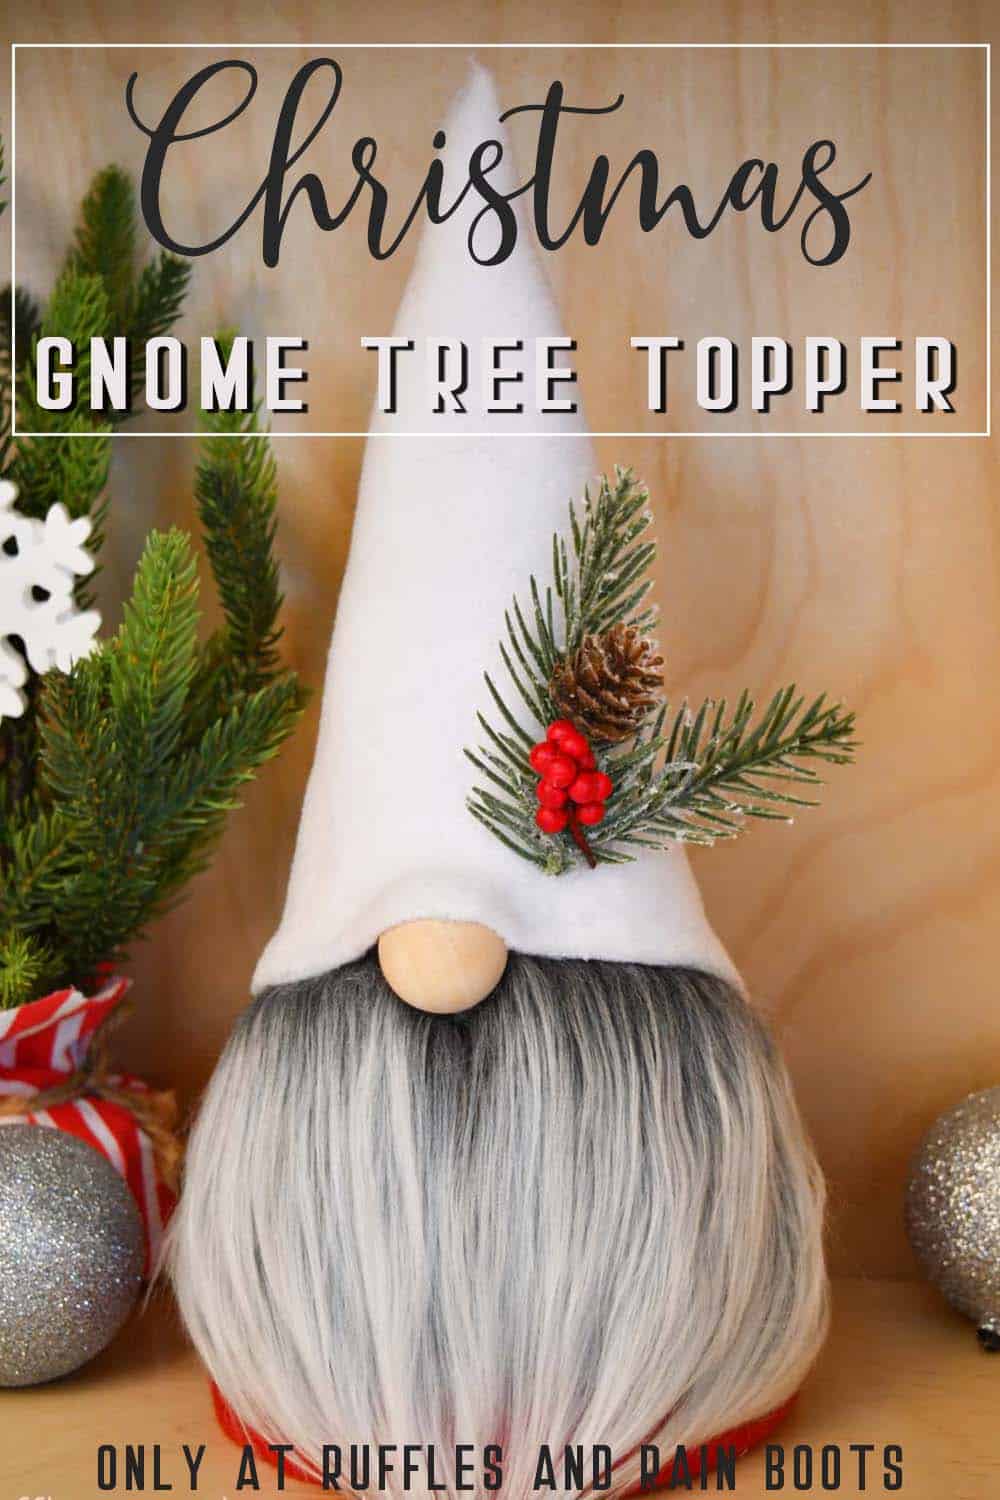 white hat on red gnome with gray beard and pine and berry accent in front of a holiday background with text which reads Christmas gnome tree topper only at ruffles and rain boots